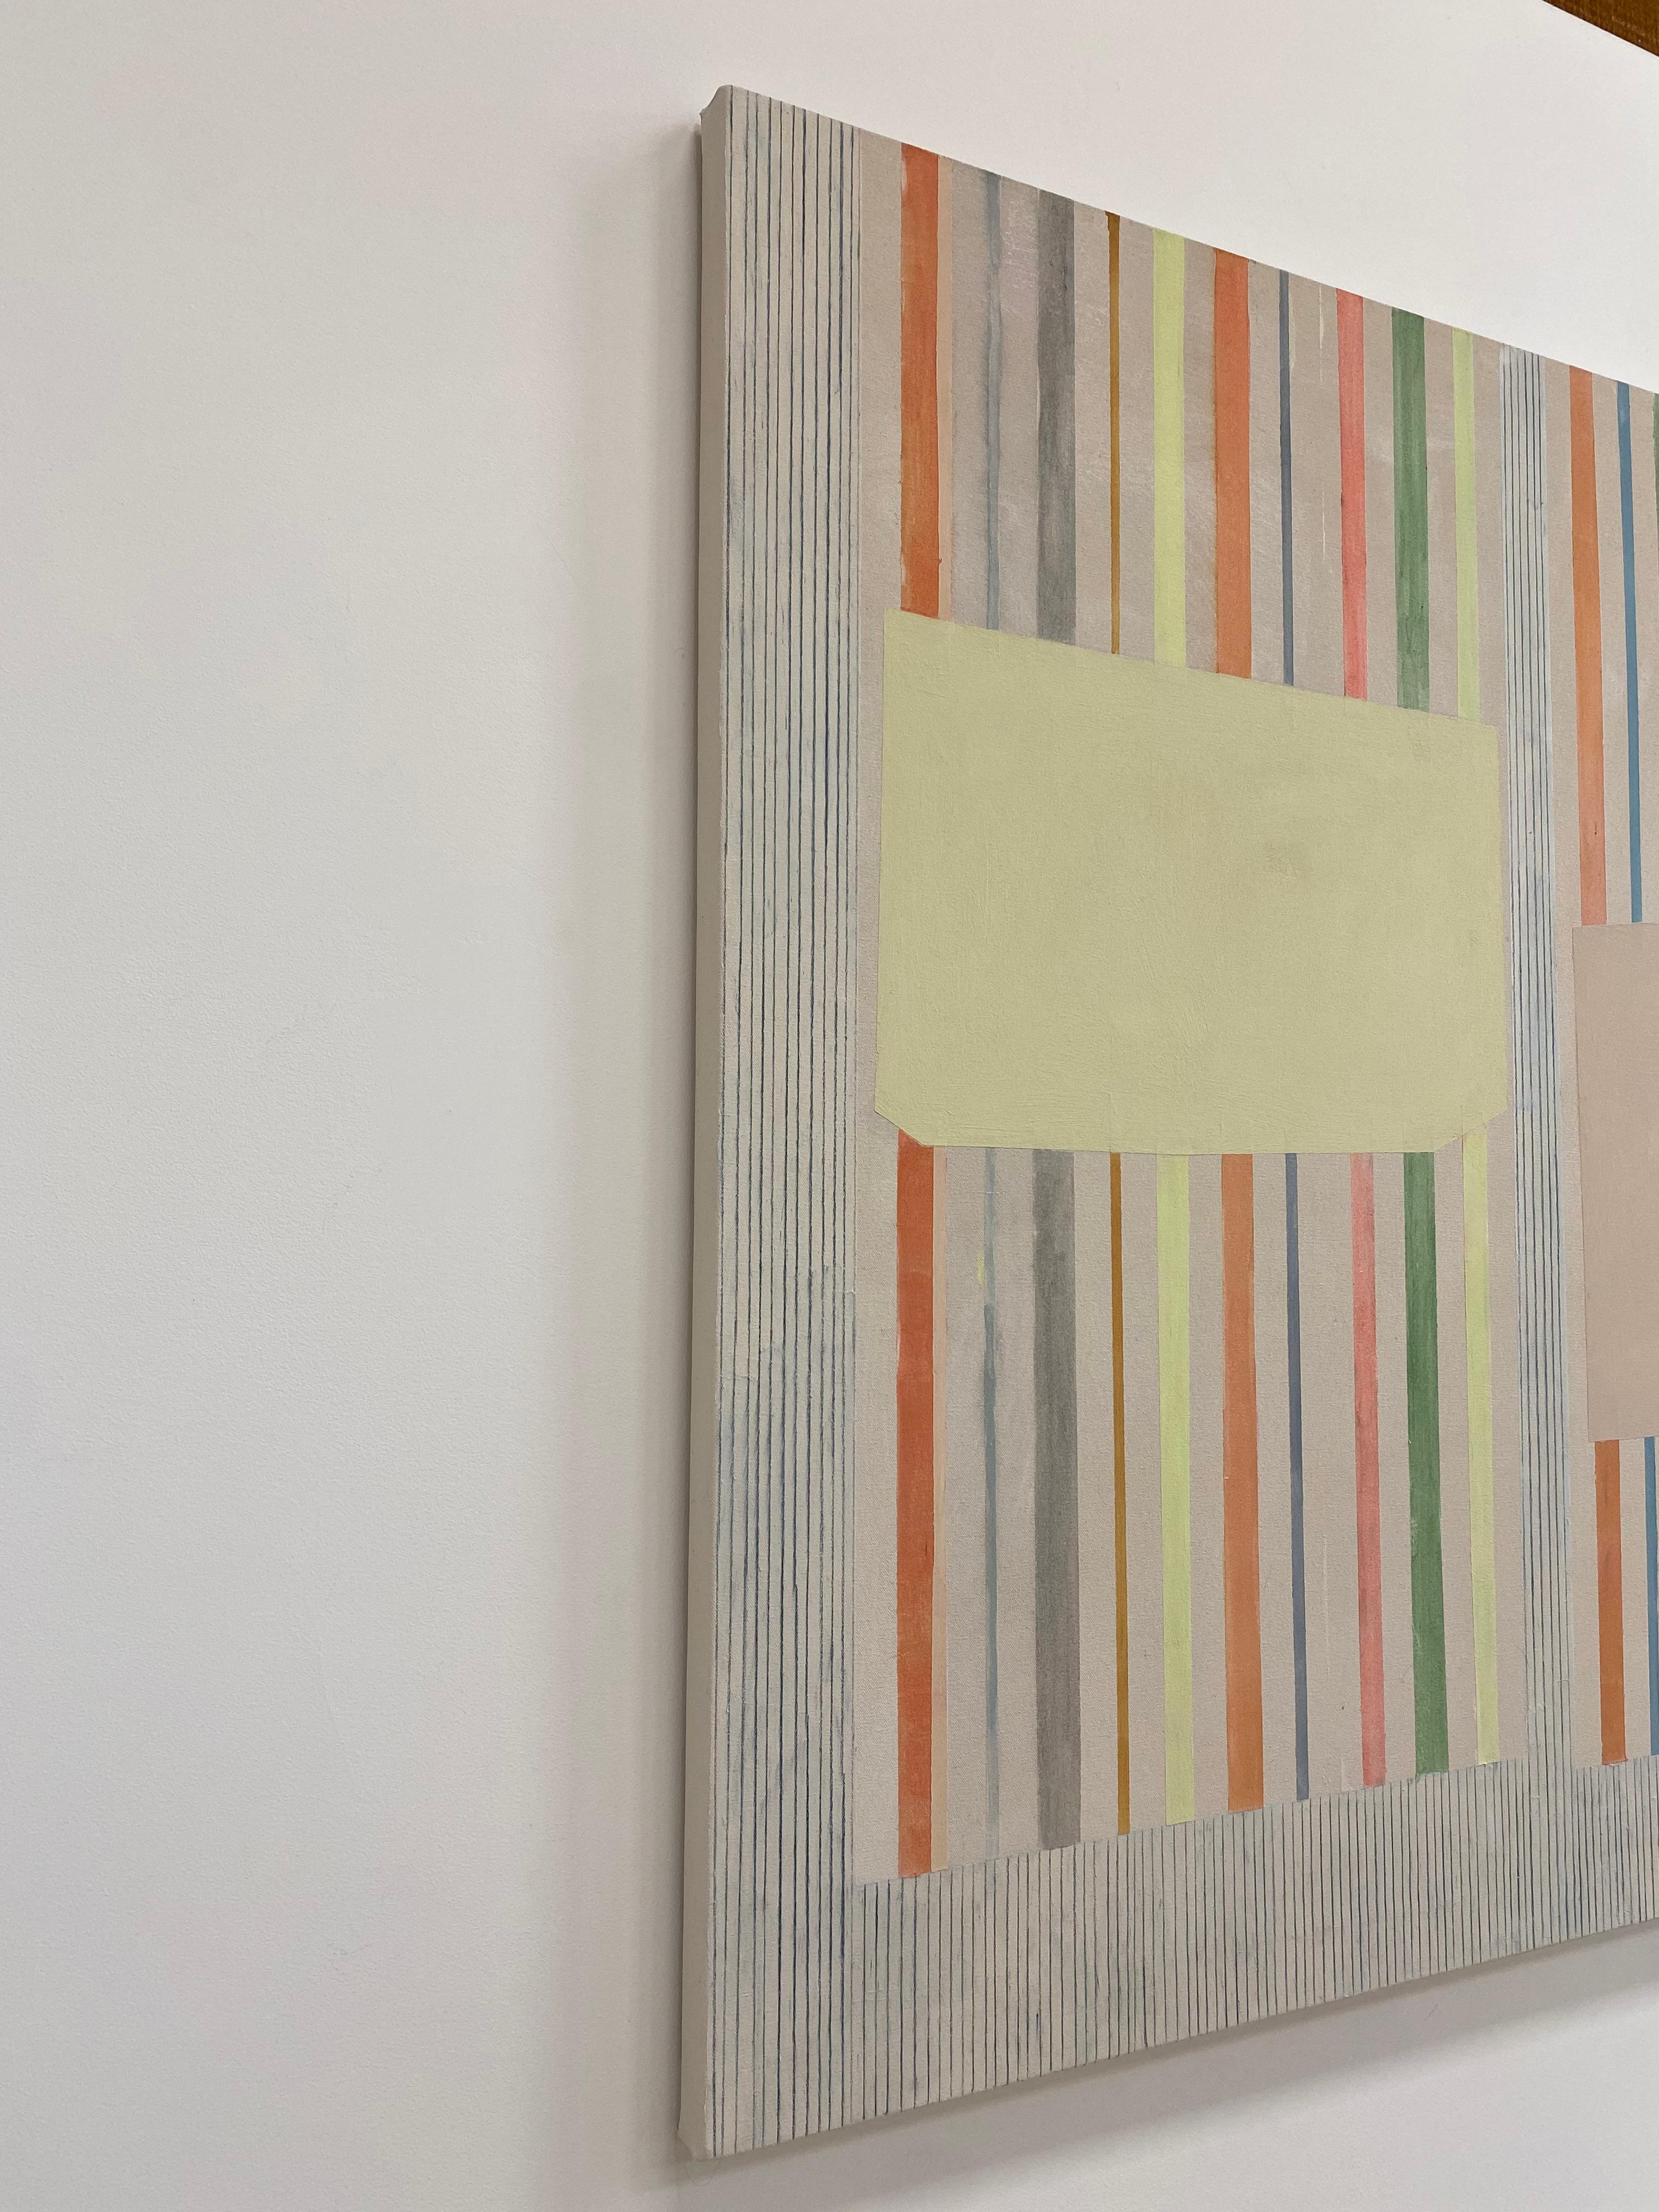 Clean and precise, carefully ordered stripes and blocks of color in orange, green, pale lemon yellow, gray, blue and brown are lively and vibrant against the soft beige background. Signed, dated and titled on verso.

Elizabeth Gourlay’s work is a